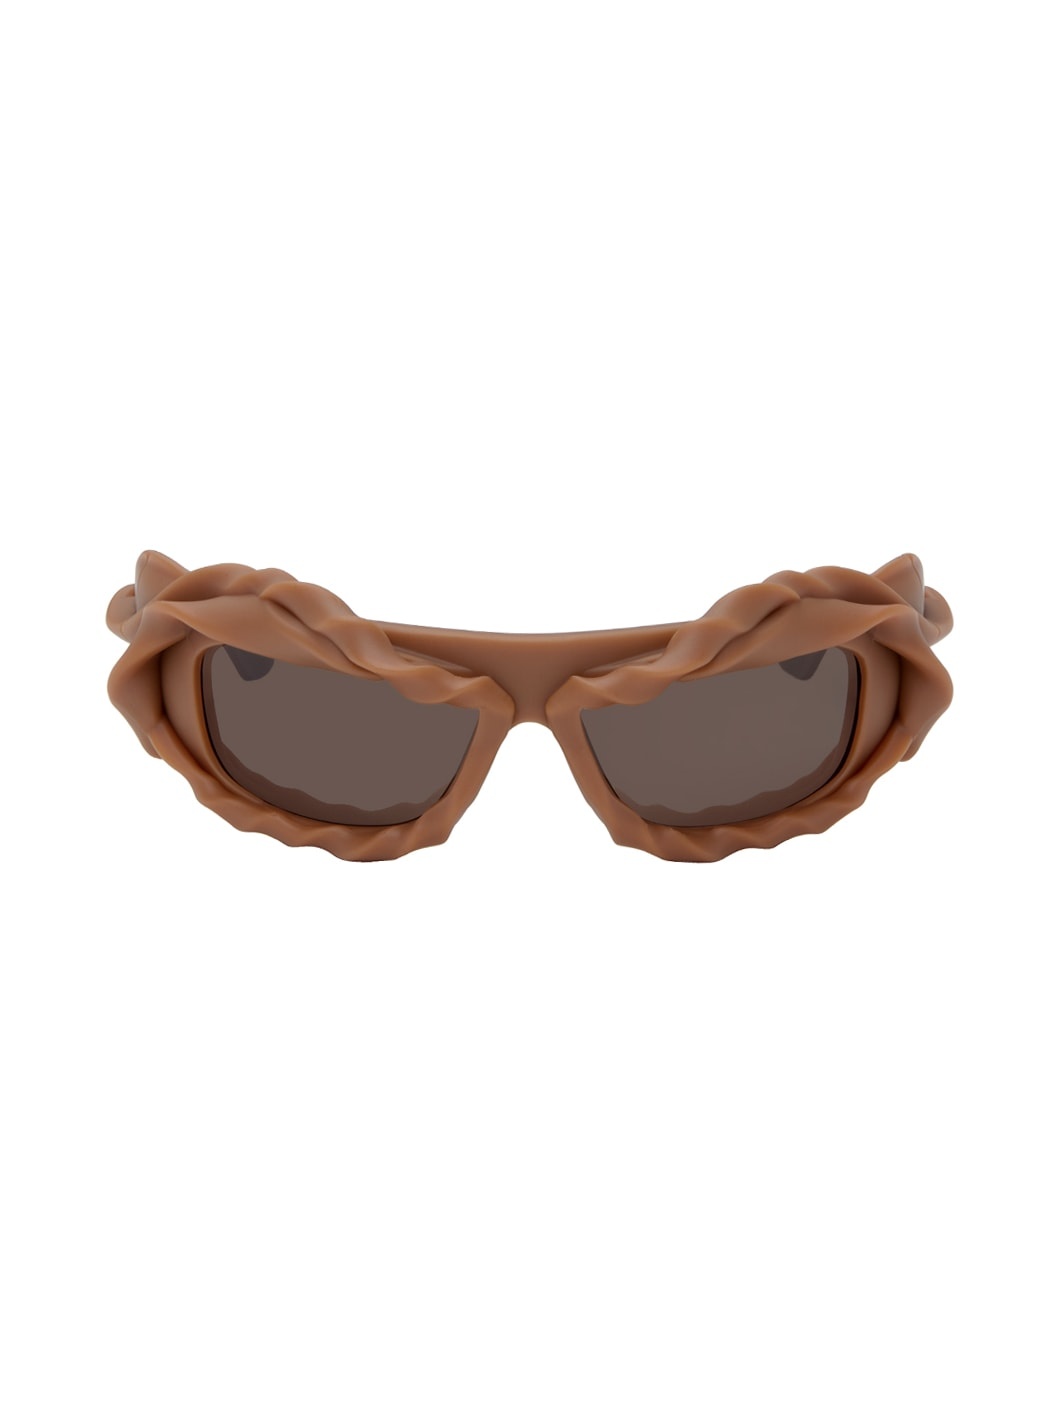 SSENSE Exclusive Brown Twisted Sunglasses - 1